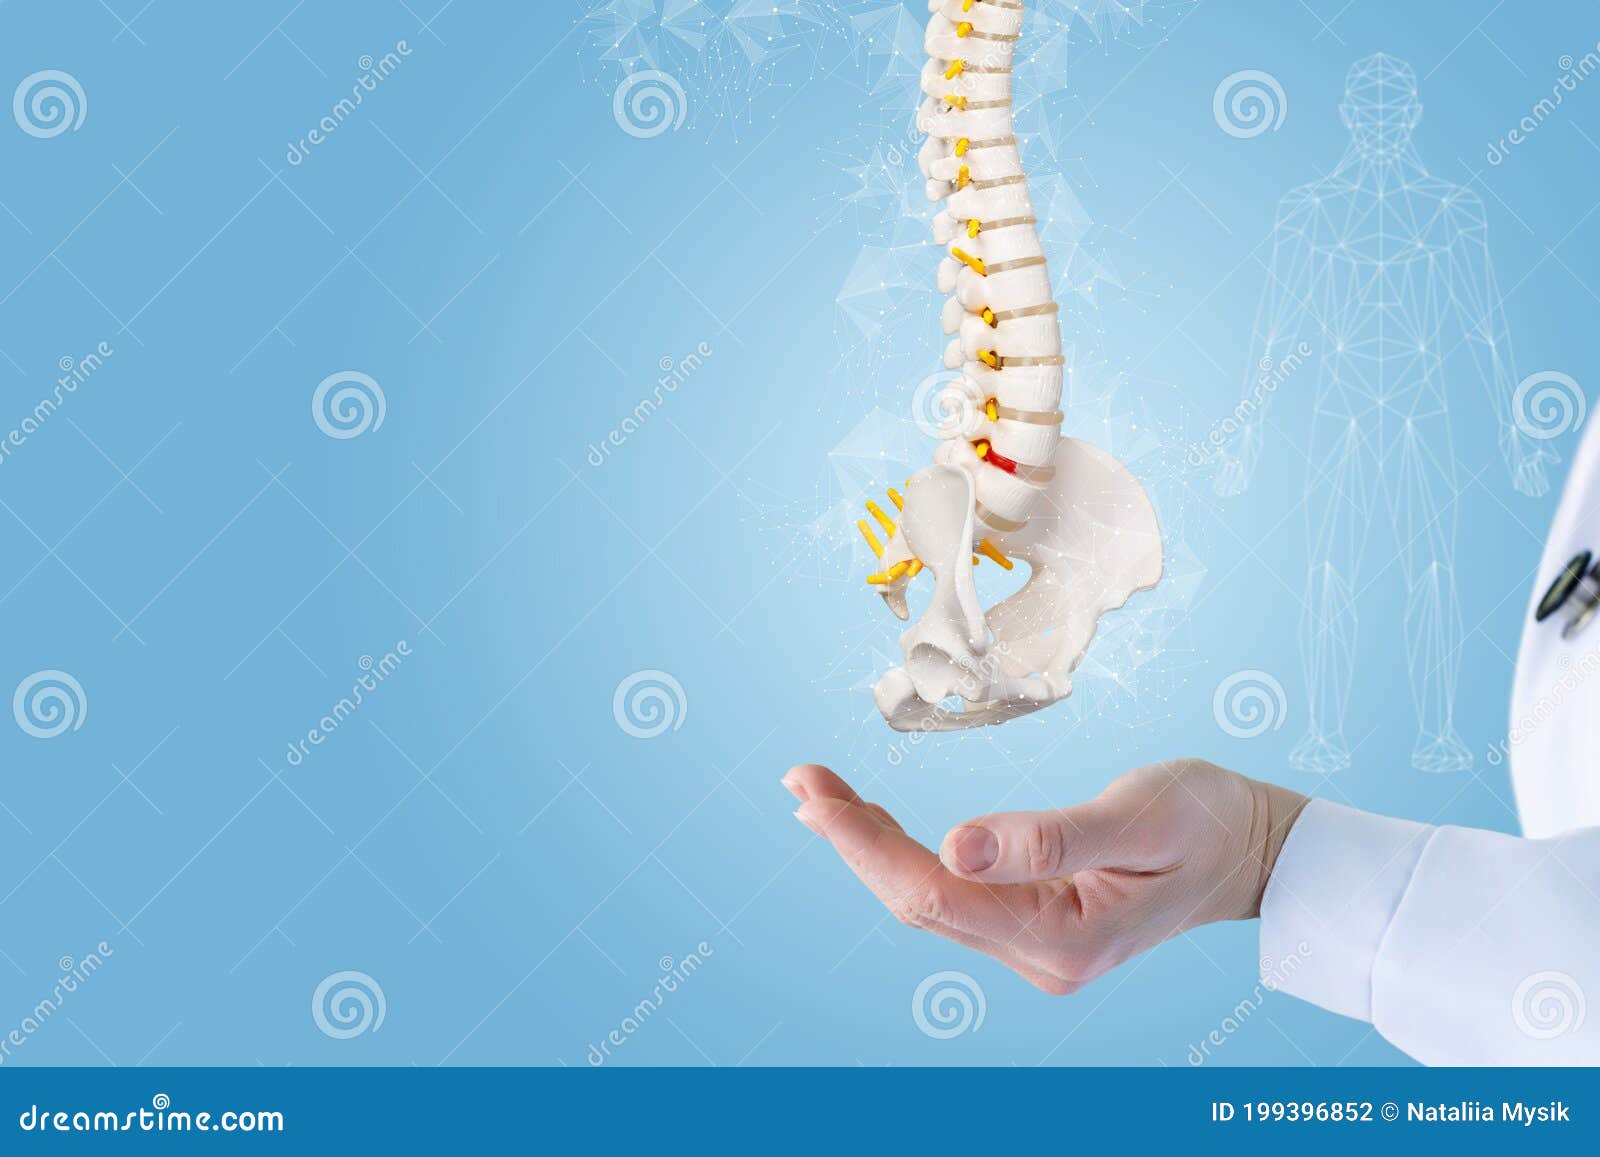 doctor hand shows the spine